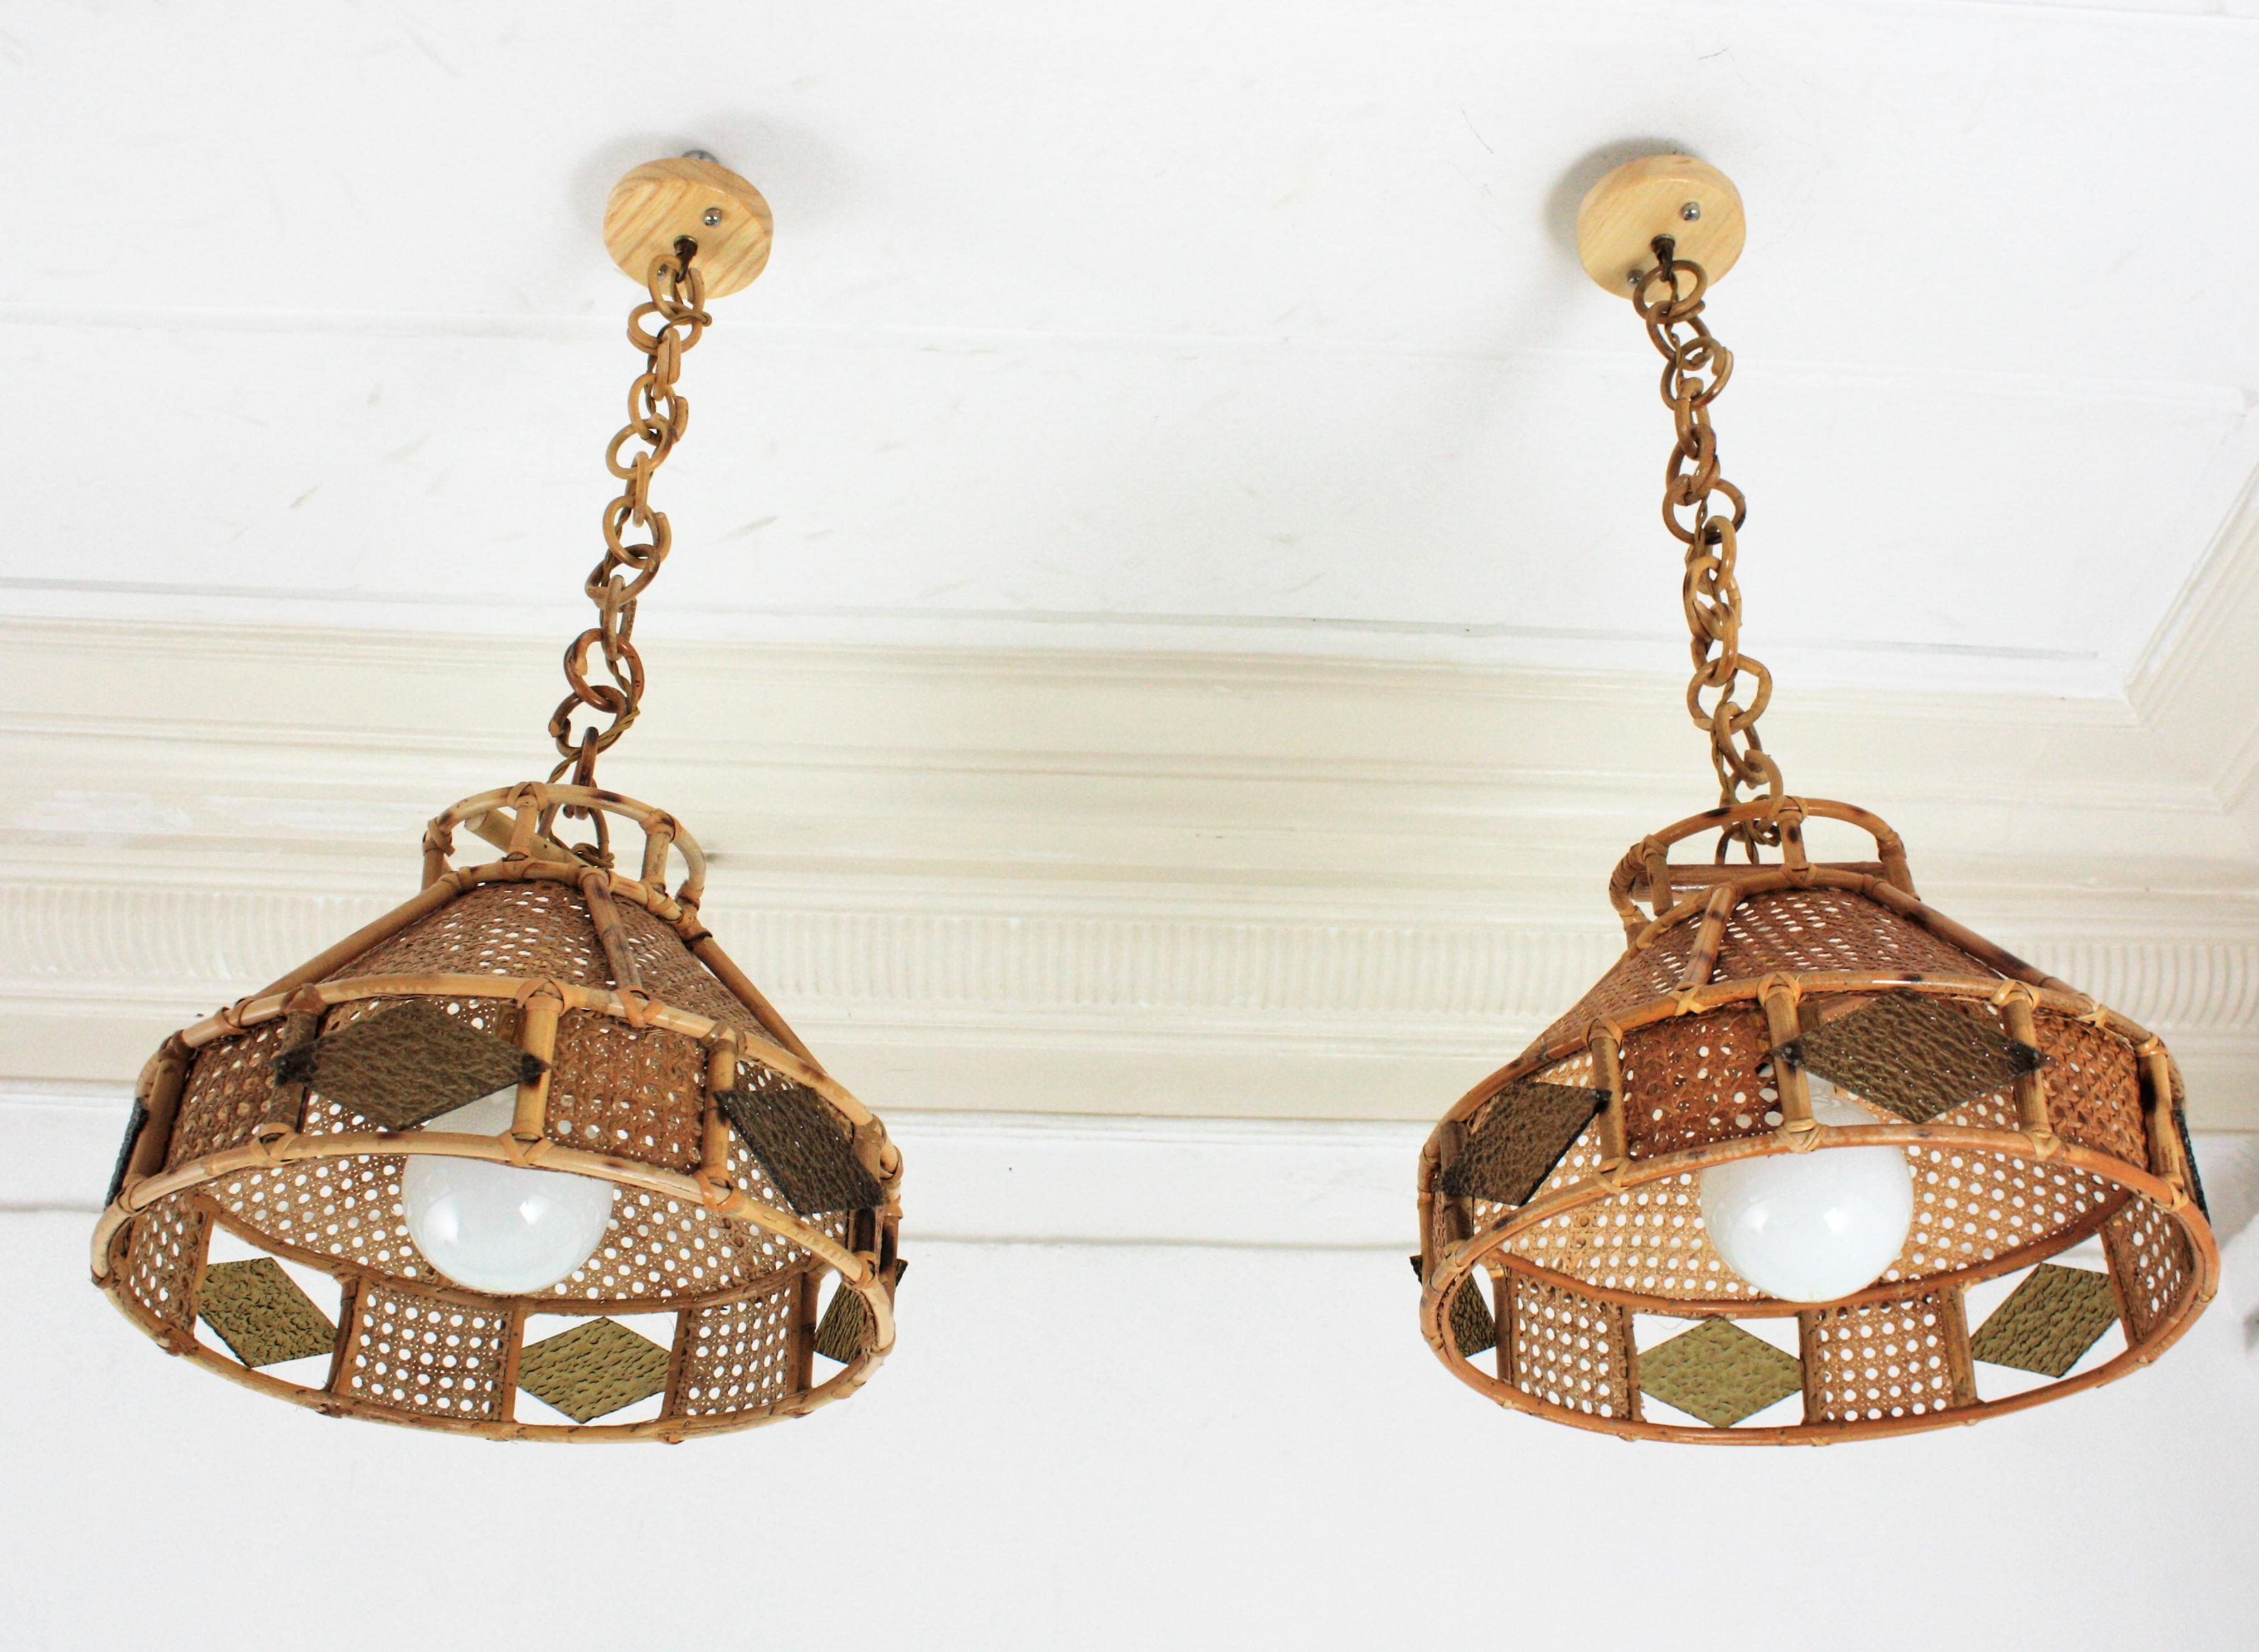 Rare Mid-Century Modern woven wicker wire and rattan pendant lamps / lanterns with textured glass rhombus, Italy, 1950s-1960s.
The woven wicker conic shades of these lamps are accented by textured rhombus shaped amber glasses. They hang from a